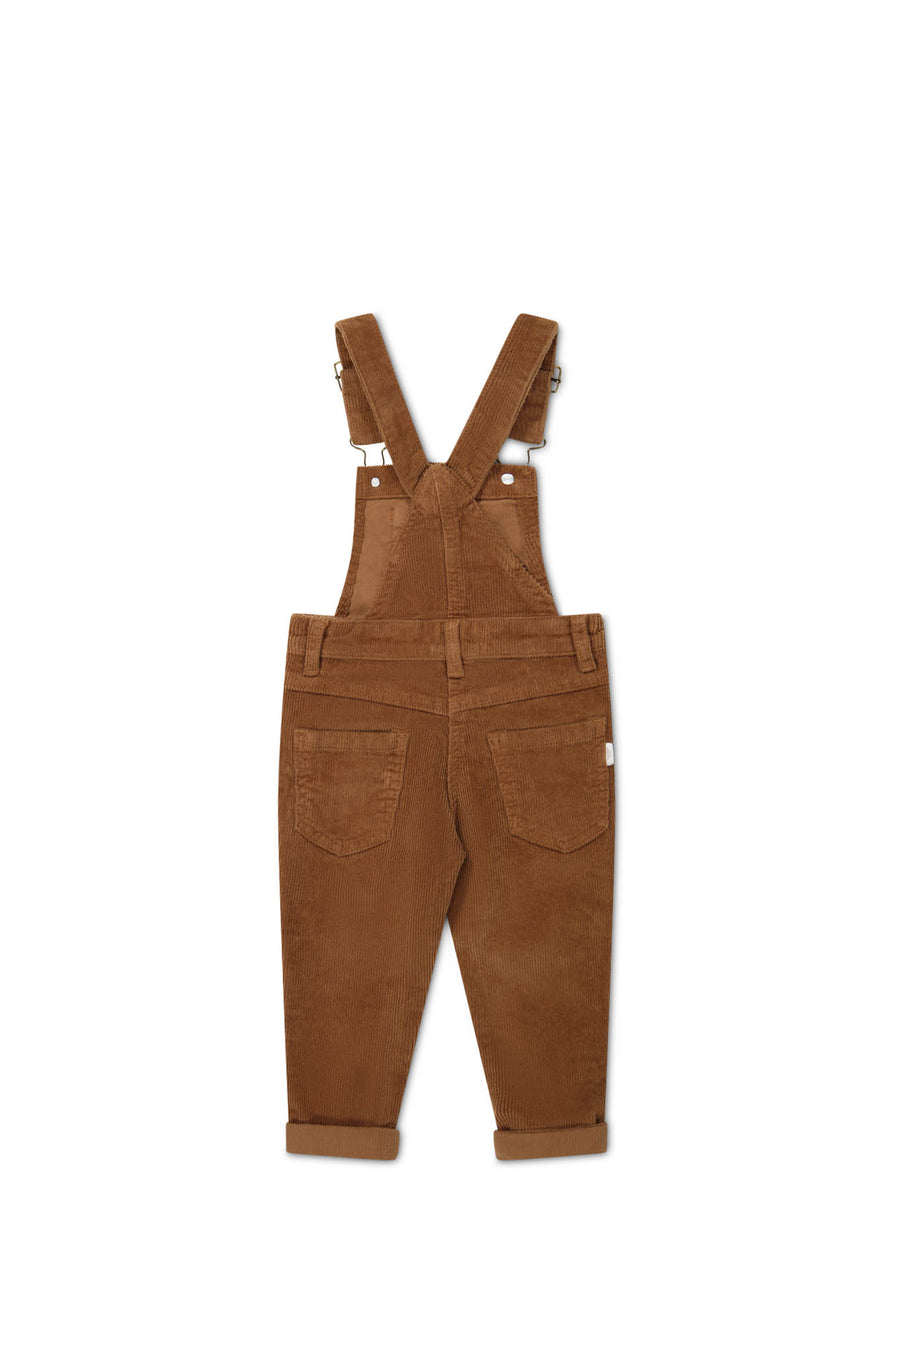 Jordie Cord Overall - Spiced Childrens Overall from Jamie Kay NZ